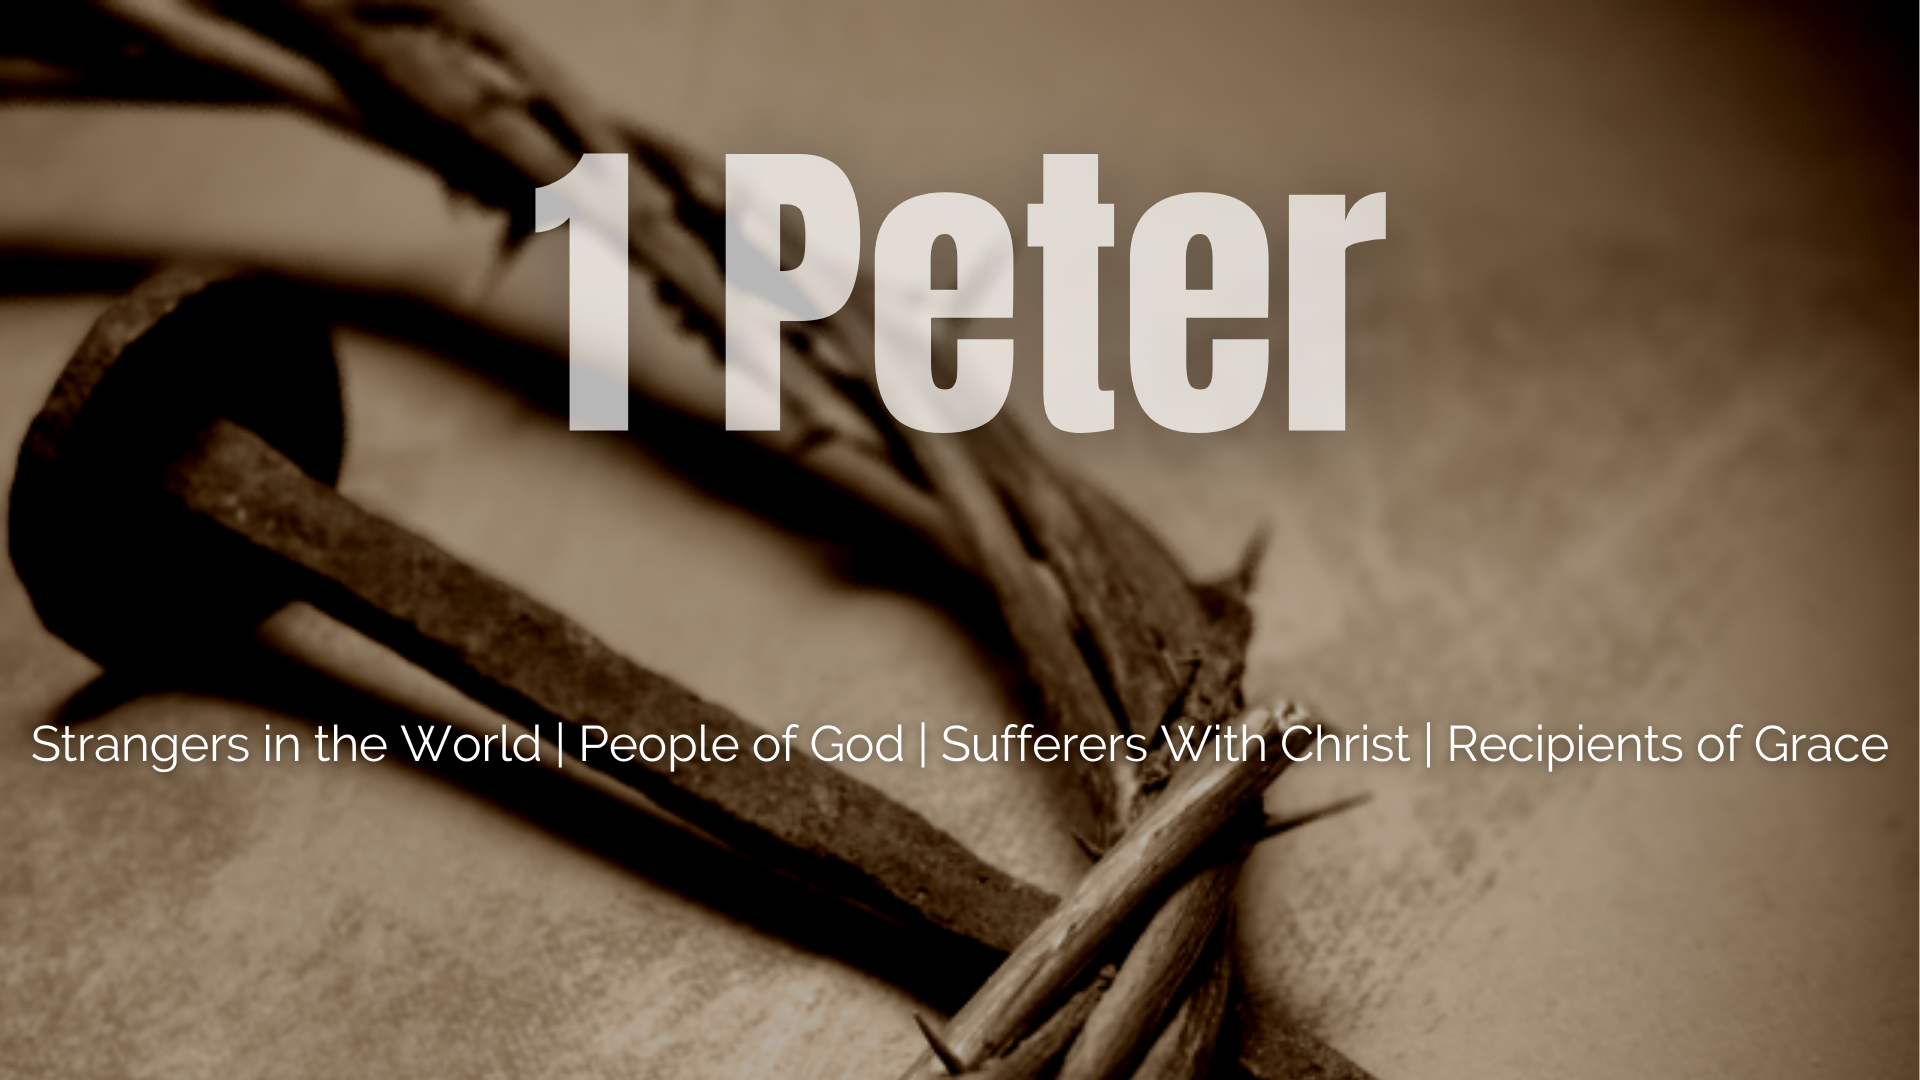 1 Peter - People of God